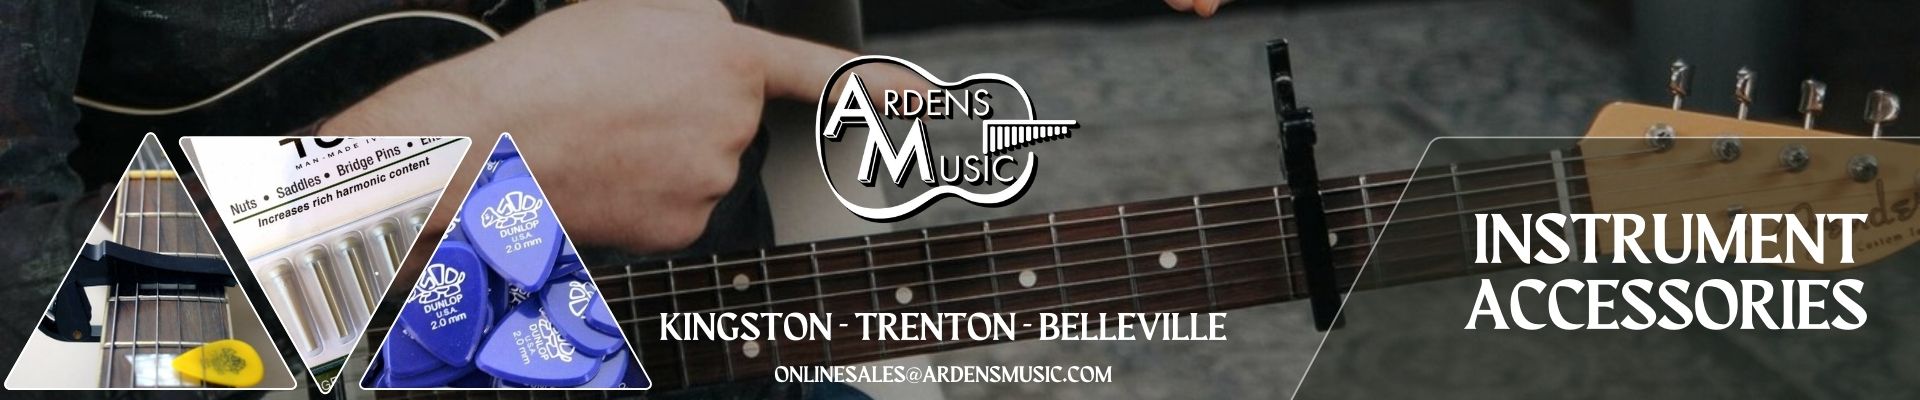 From picks, to straps, cleaning products, and humidification, Arden's offers a wide range of accessories from brands like Fender, D'addario, MusicNomad, Dunlop, Levy's & more!